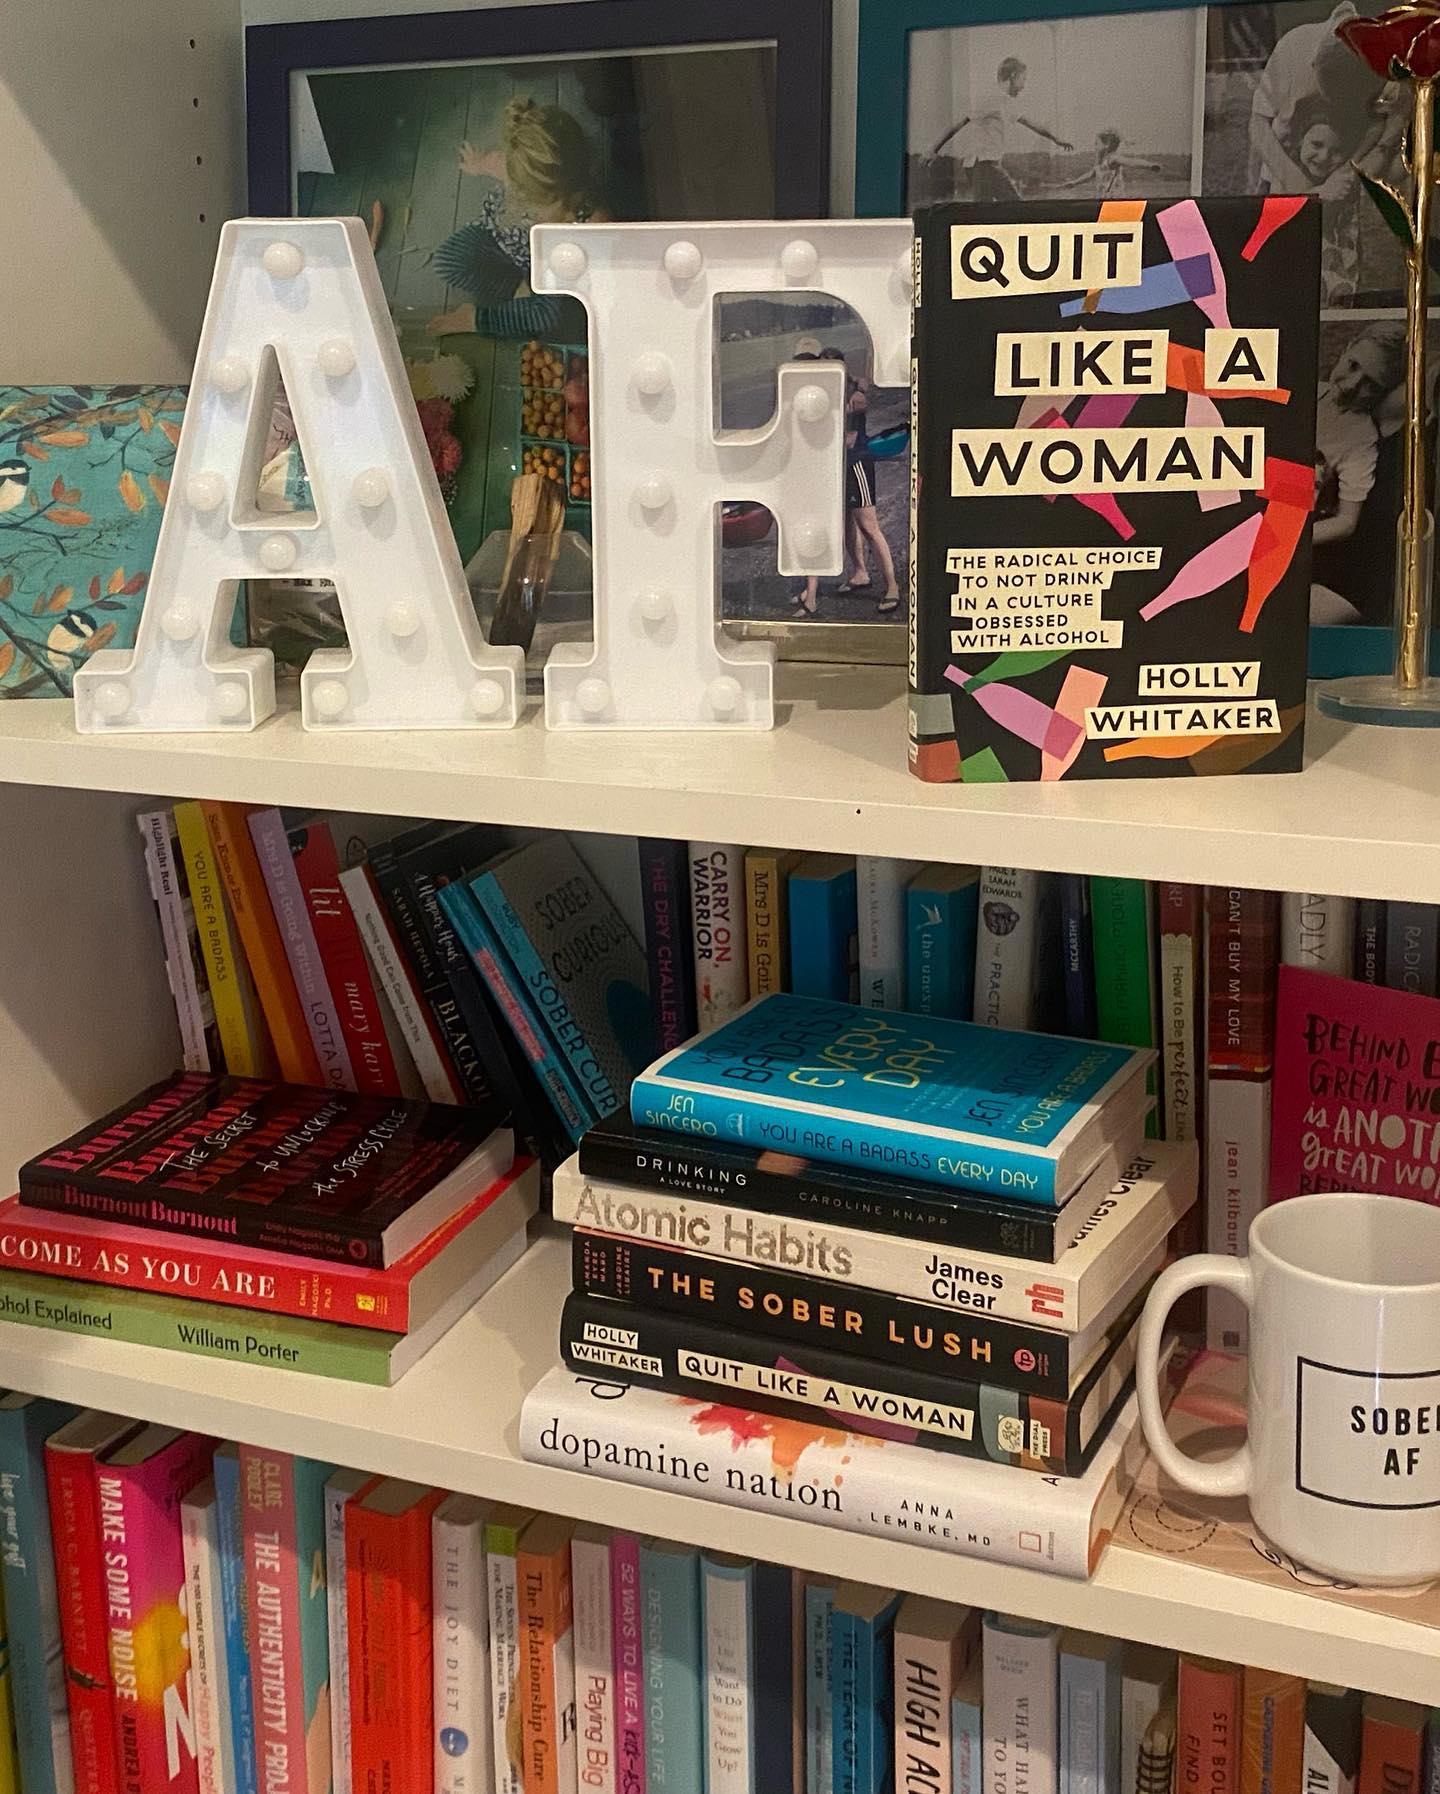 The best books for women quitting drinking and going alcohol-free from my bookshelf. Featuring Quit Like A Woman by Holly Whitaker.